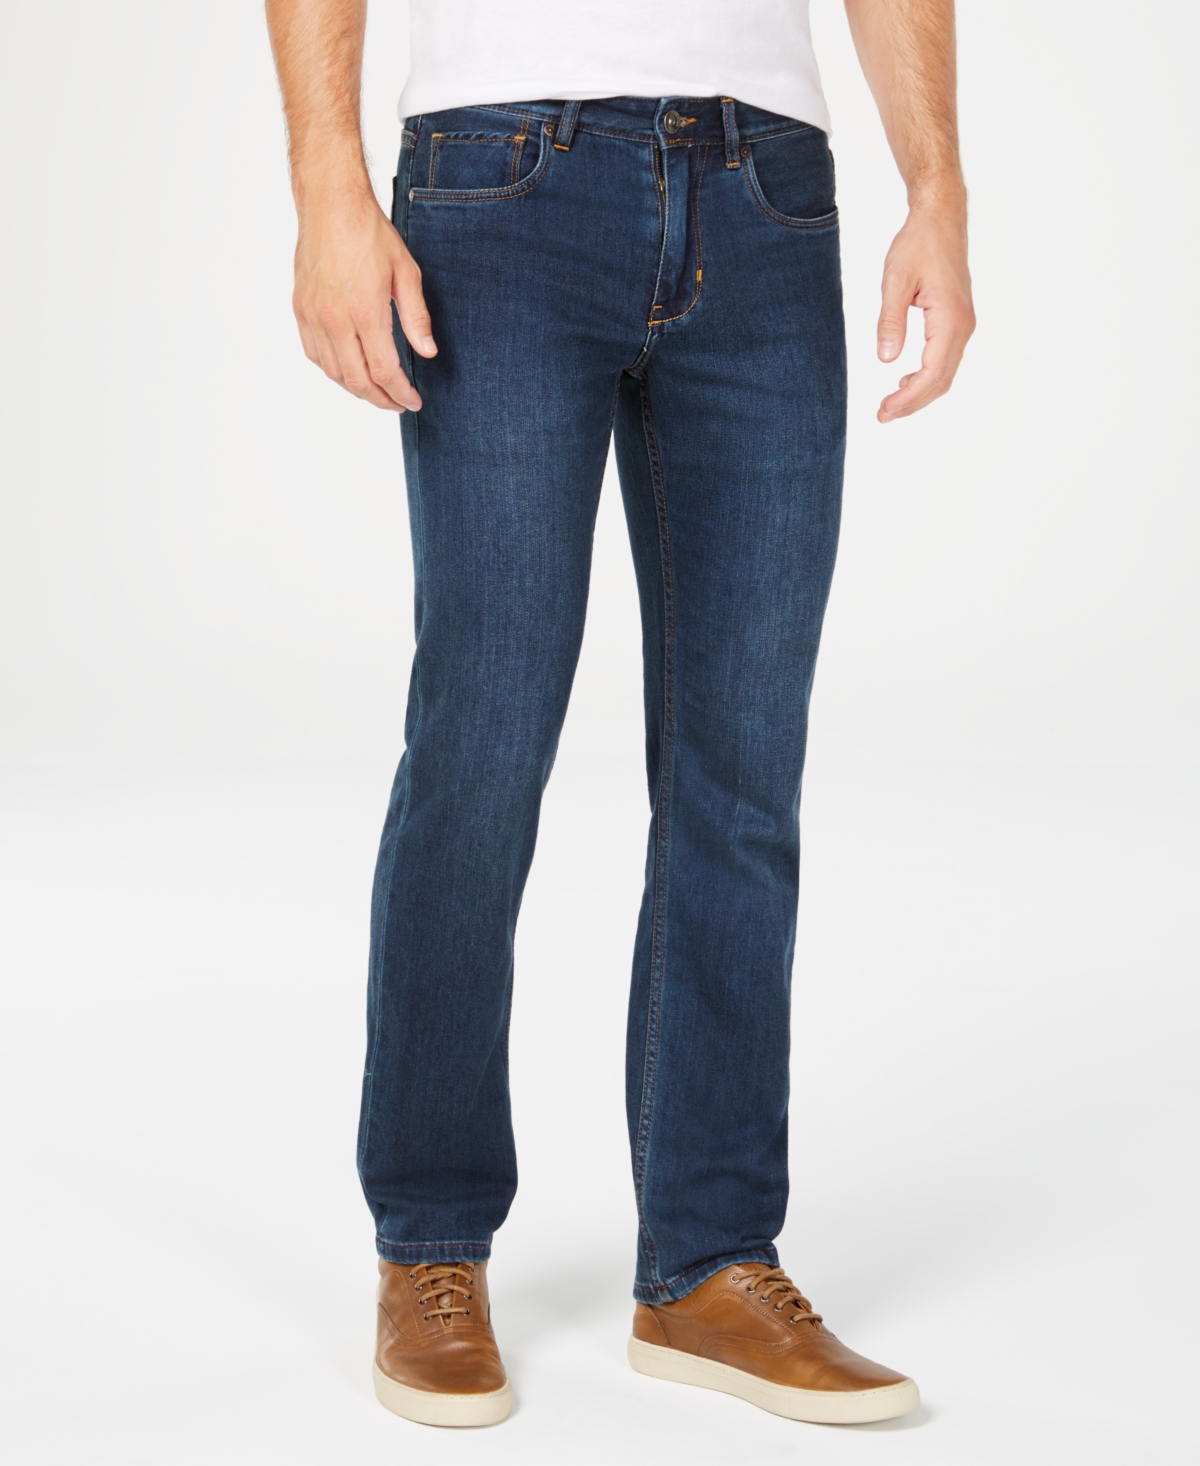 UPC 719260342439 product image for Tommy Bahama Men's Antigua Cove Authentic Fit Jeans | upcitemdb.com